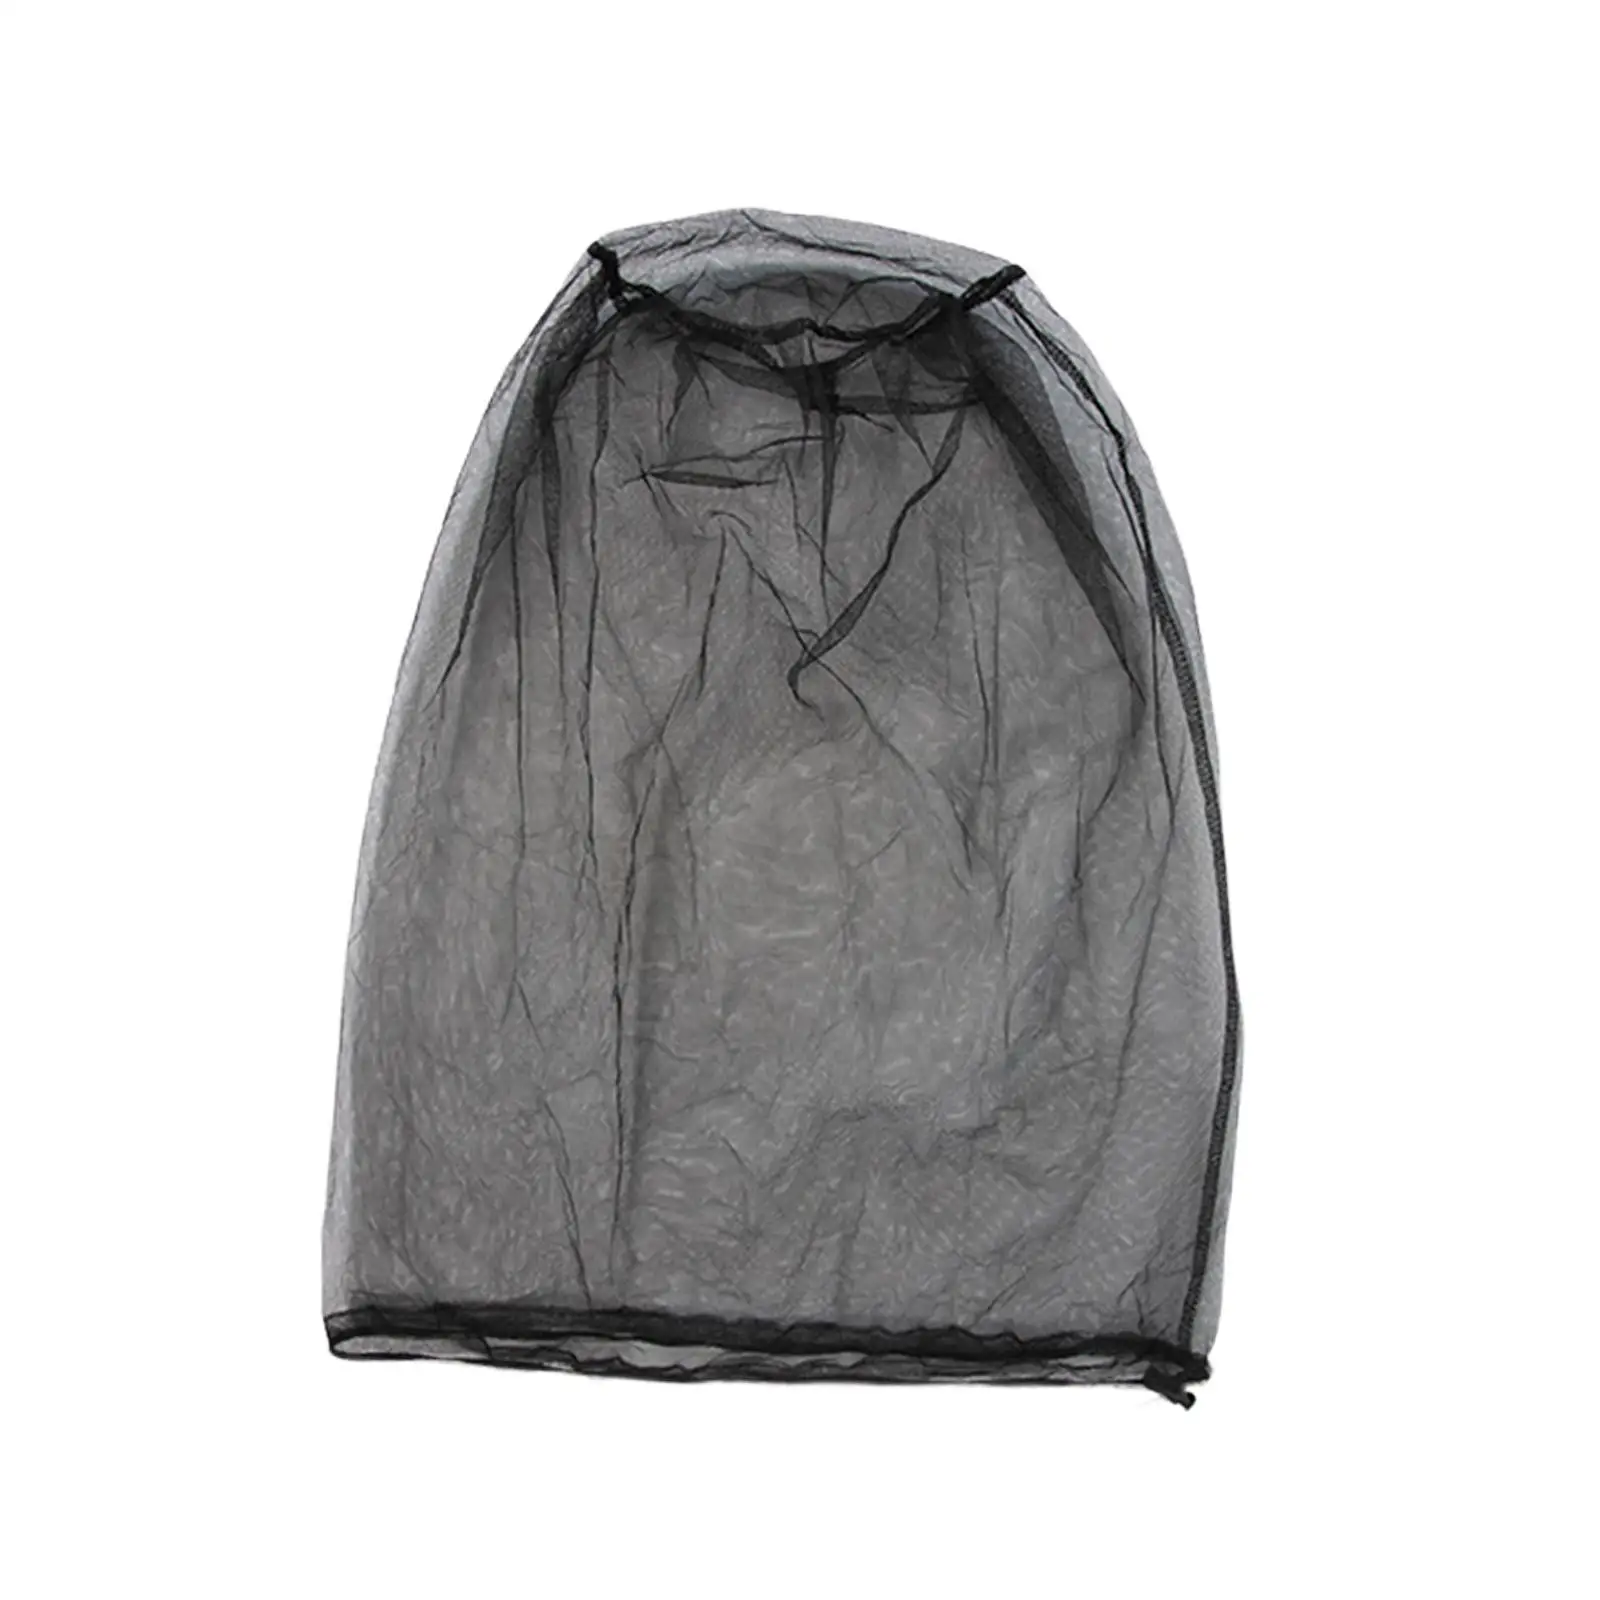 Mosquito Head Net Drawstring Men Women Breathable with Storage Bag for Camping Travel Outdoor Activity Climbing Fishing